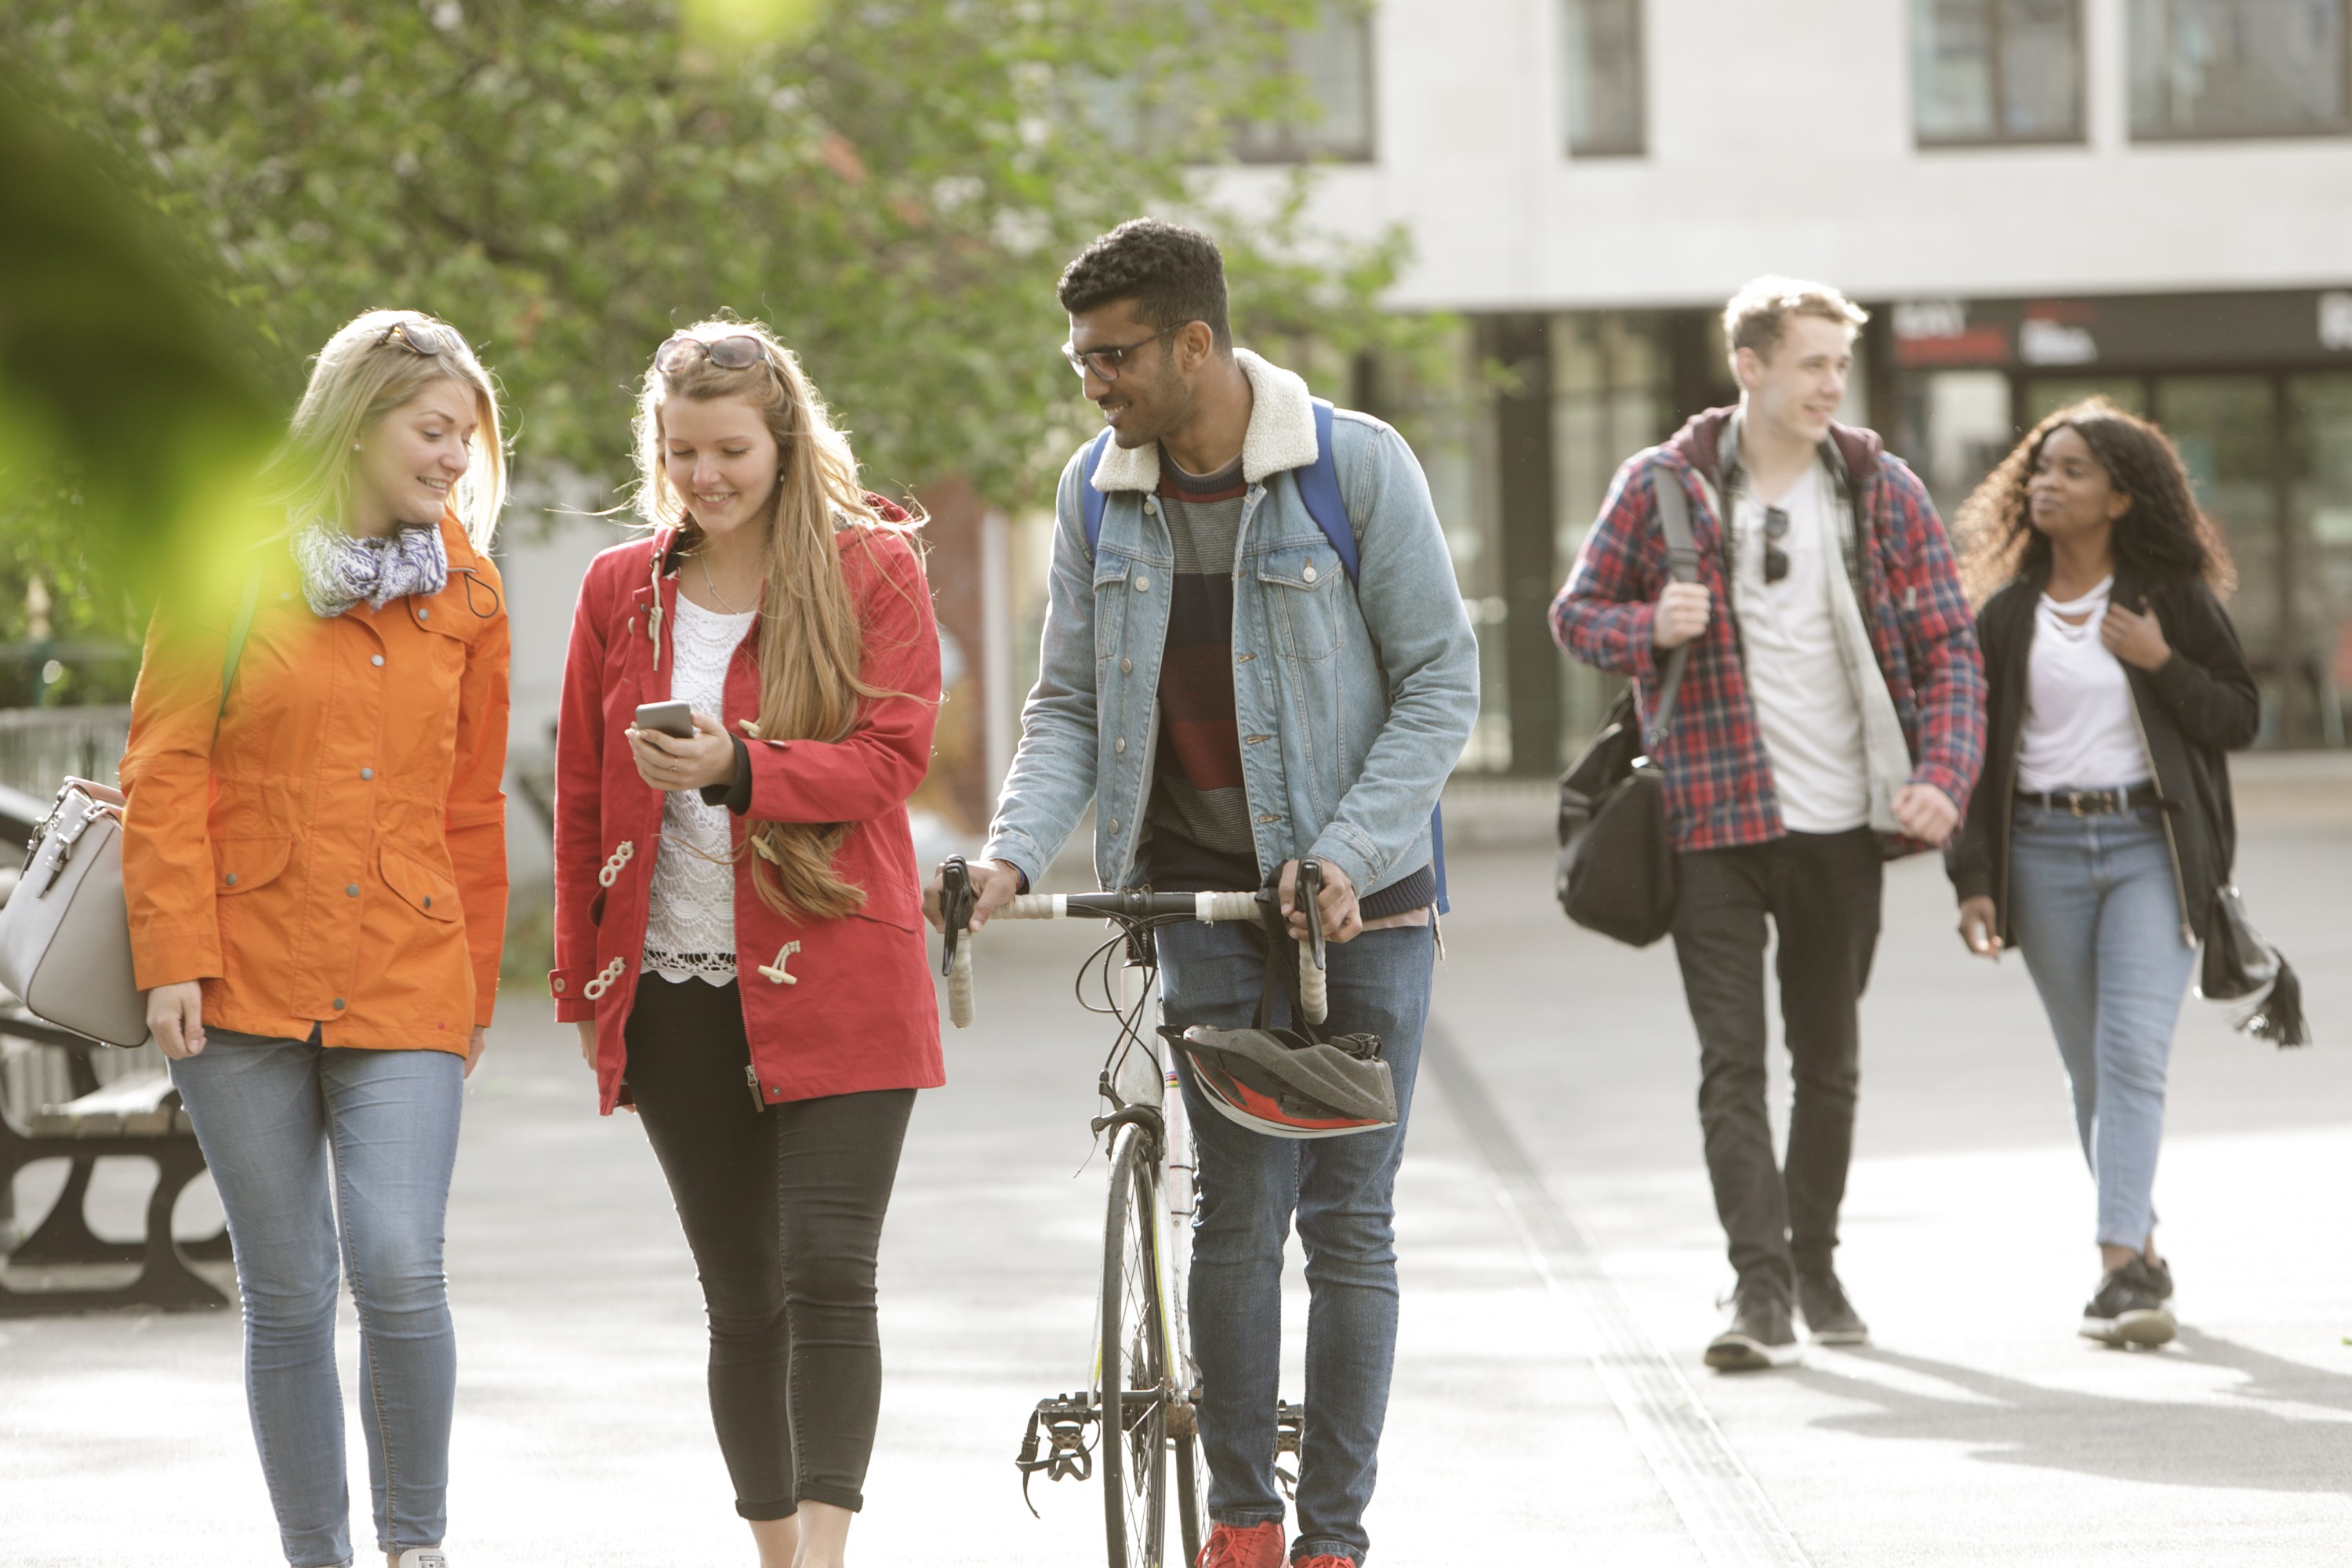 Student finance England: 3 changes you need to know about